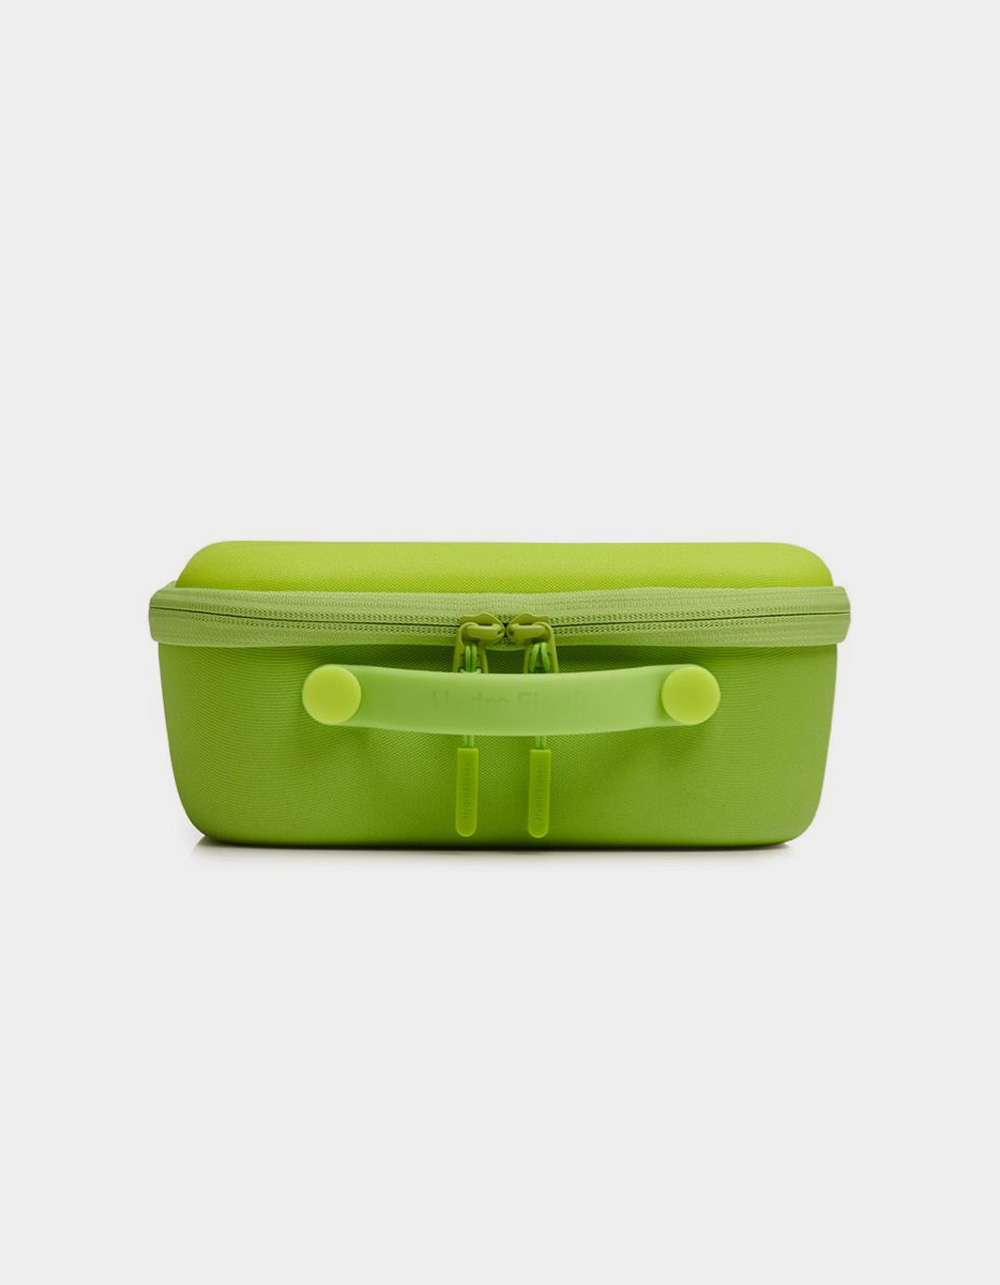 Hydro Flask Kids Insulated Lunch Box Dew